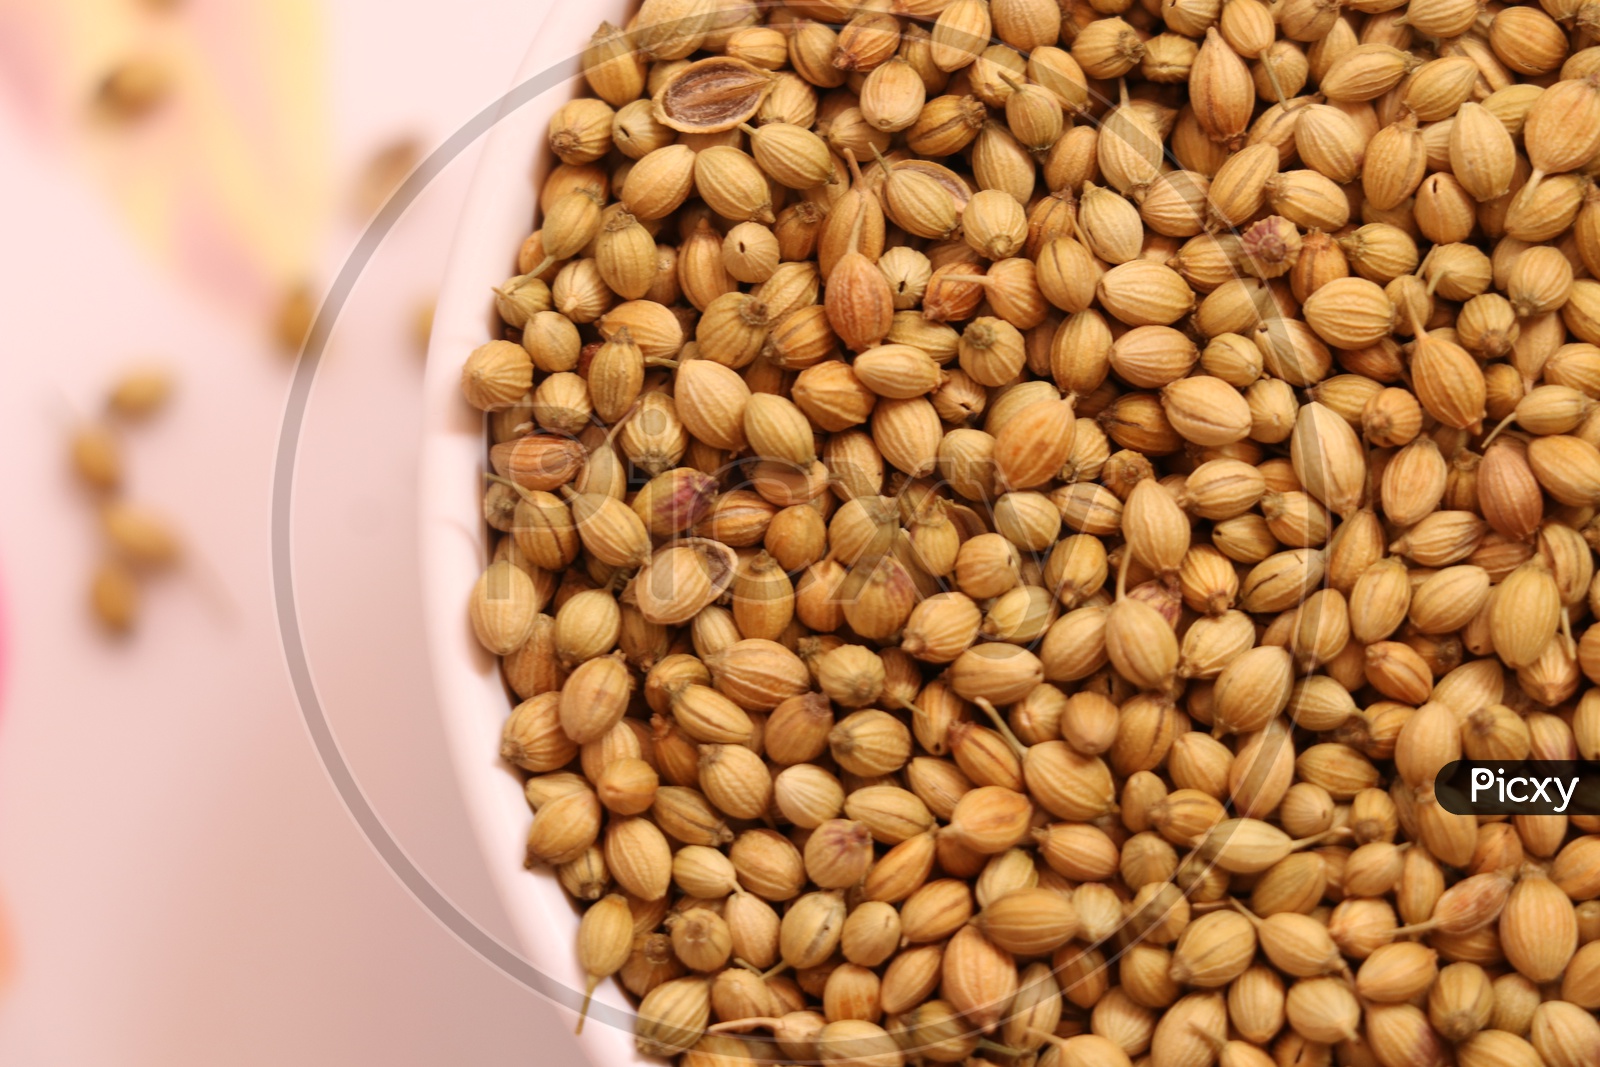 Whole and dried coriander seeds in a bowl